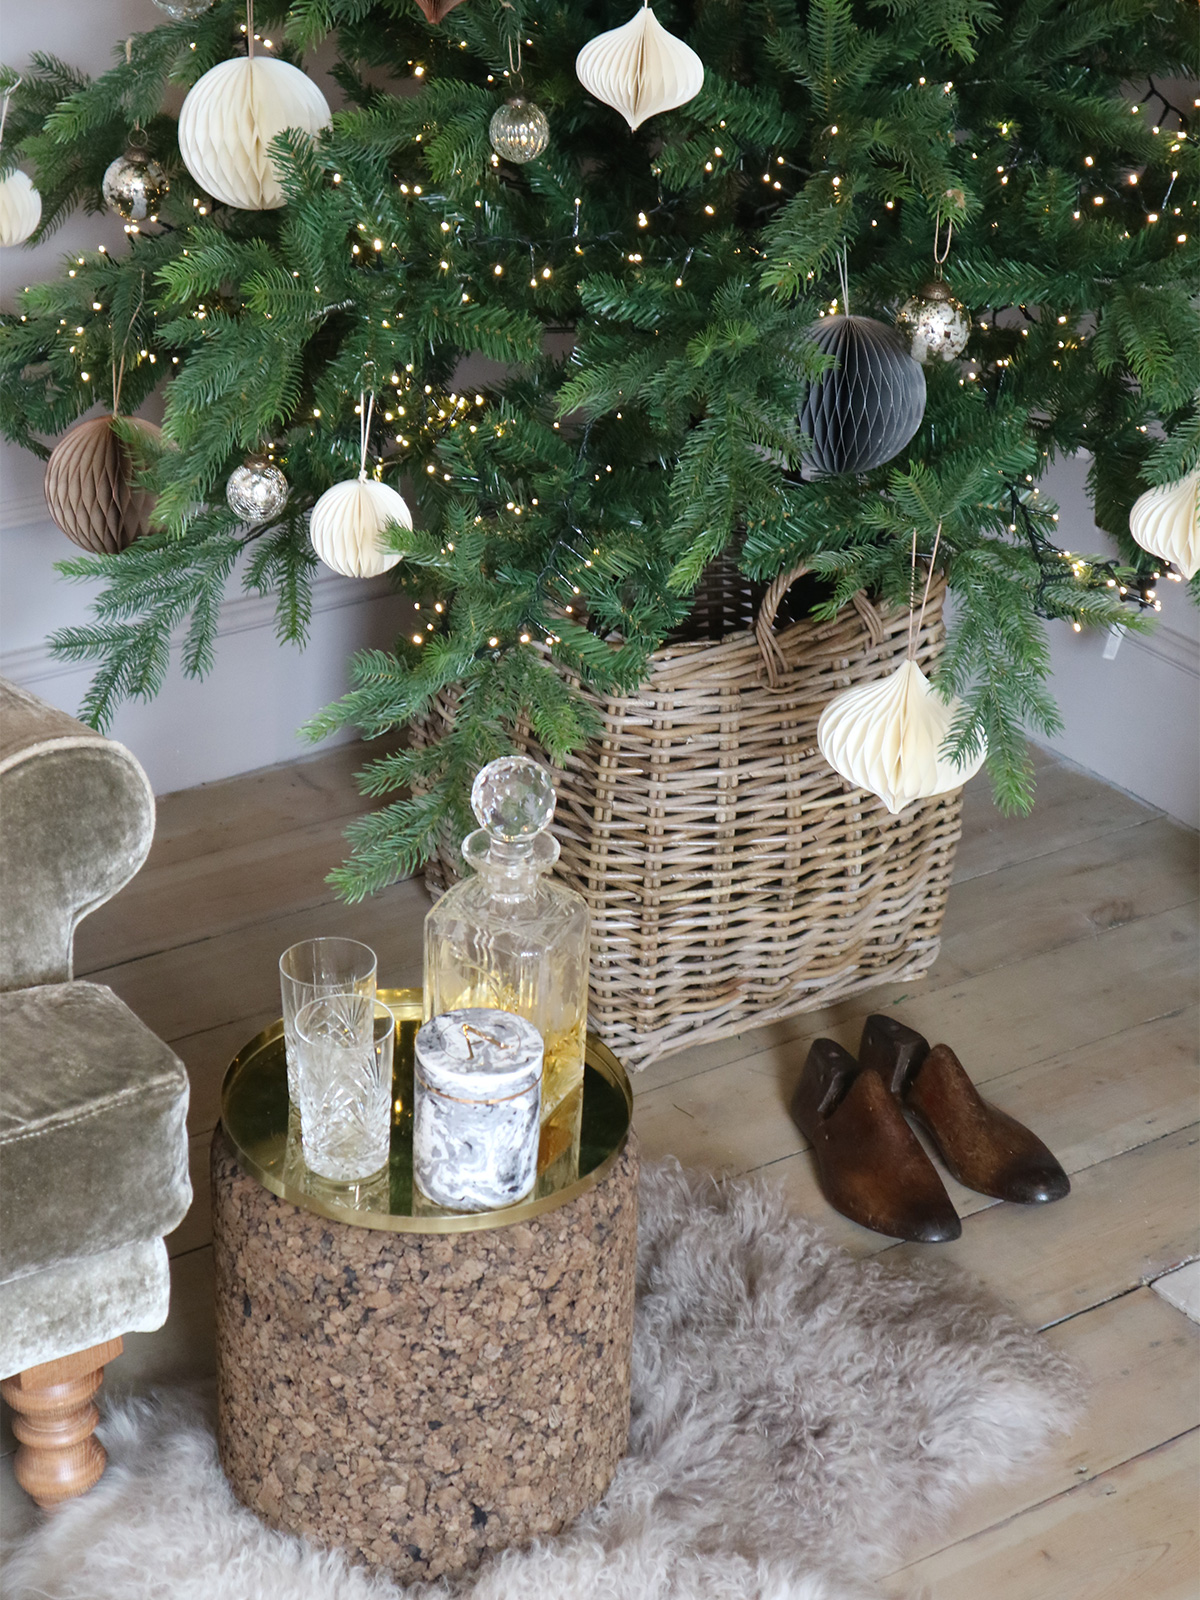 2LG Studio » Winter Hideaway – Creating a cosy home for the festive season